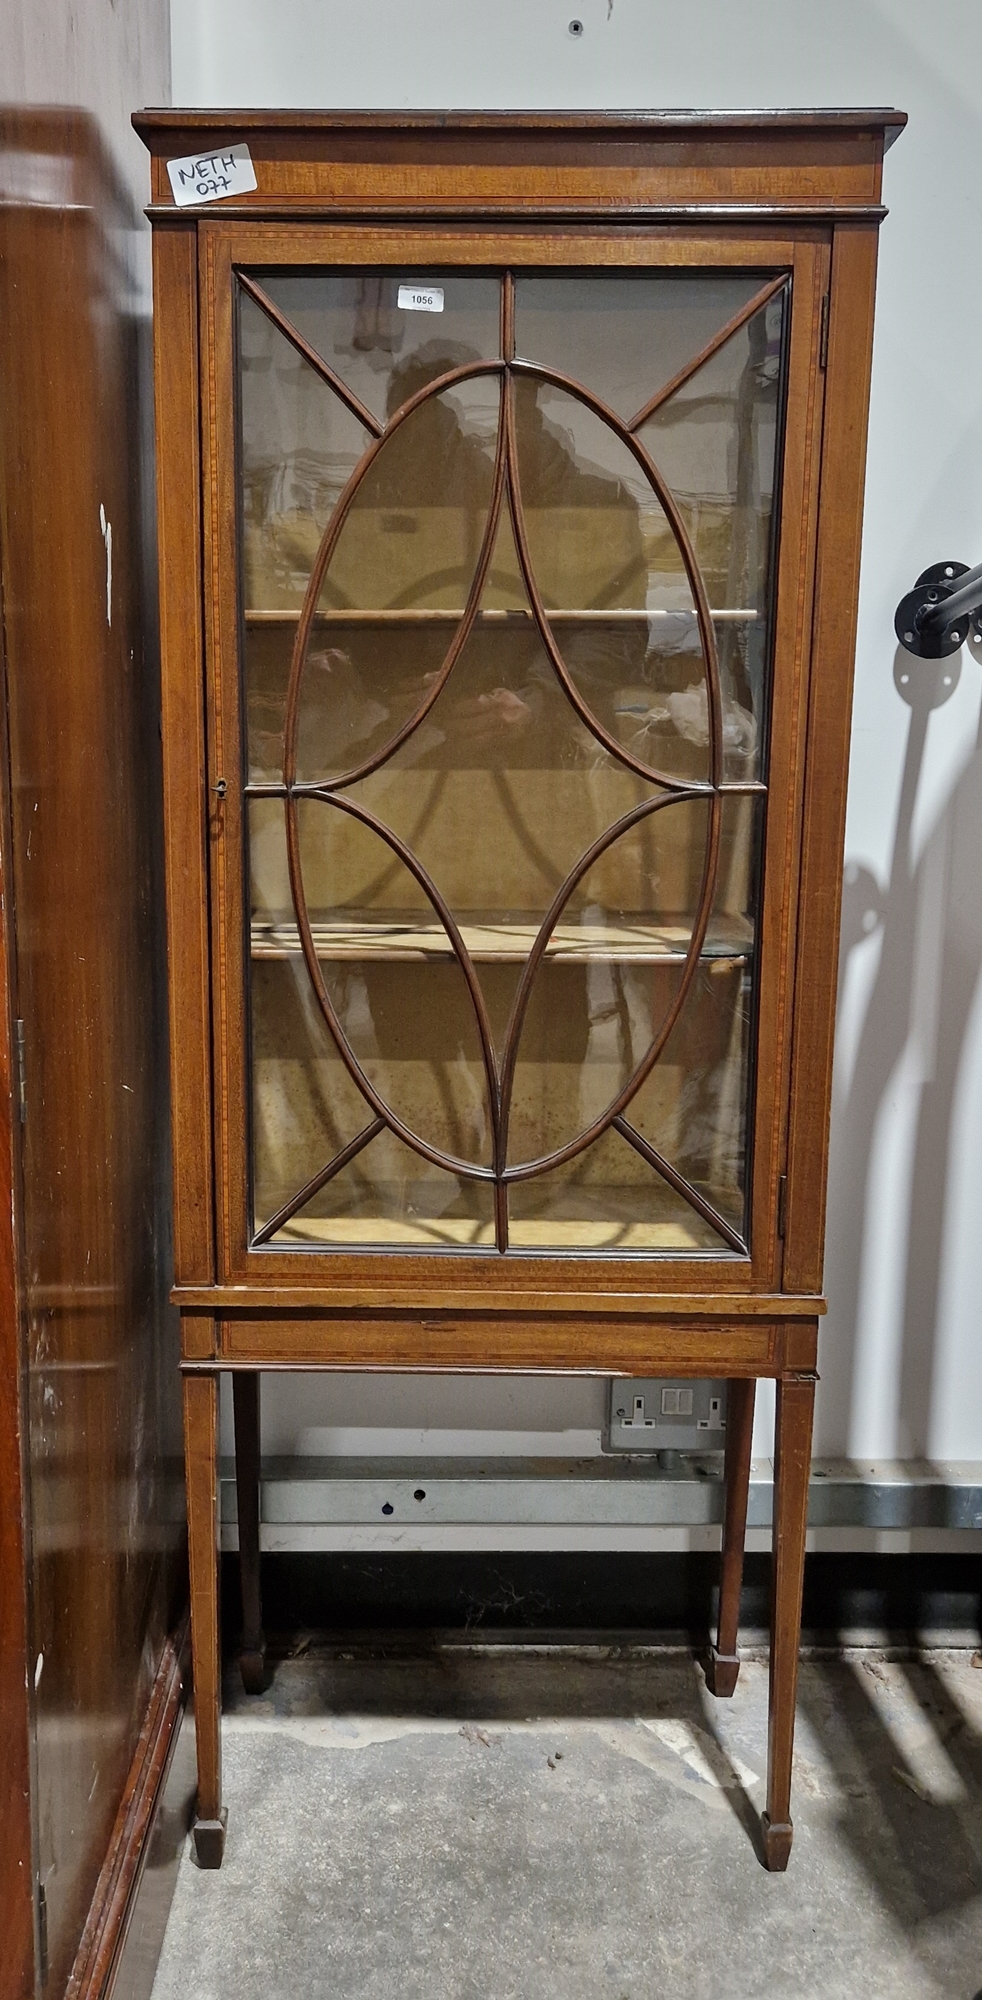 Edwardian mahogany display cabinet, the astragal glazed door opening to reveal two adjustable